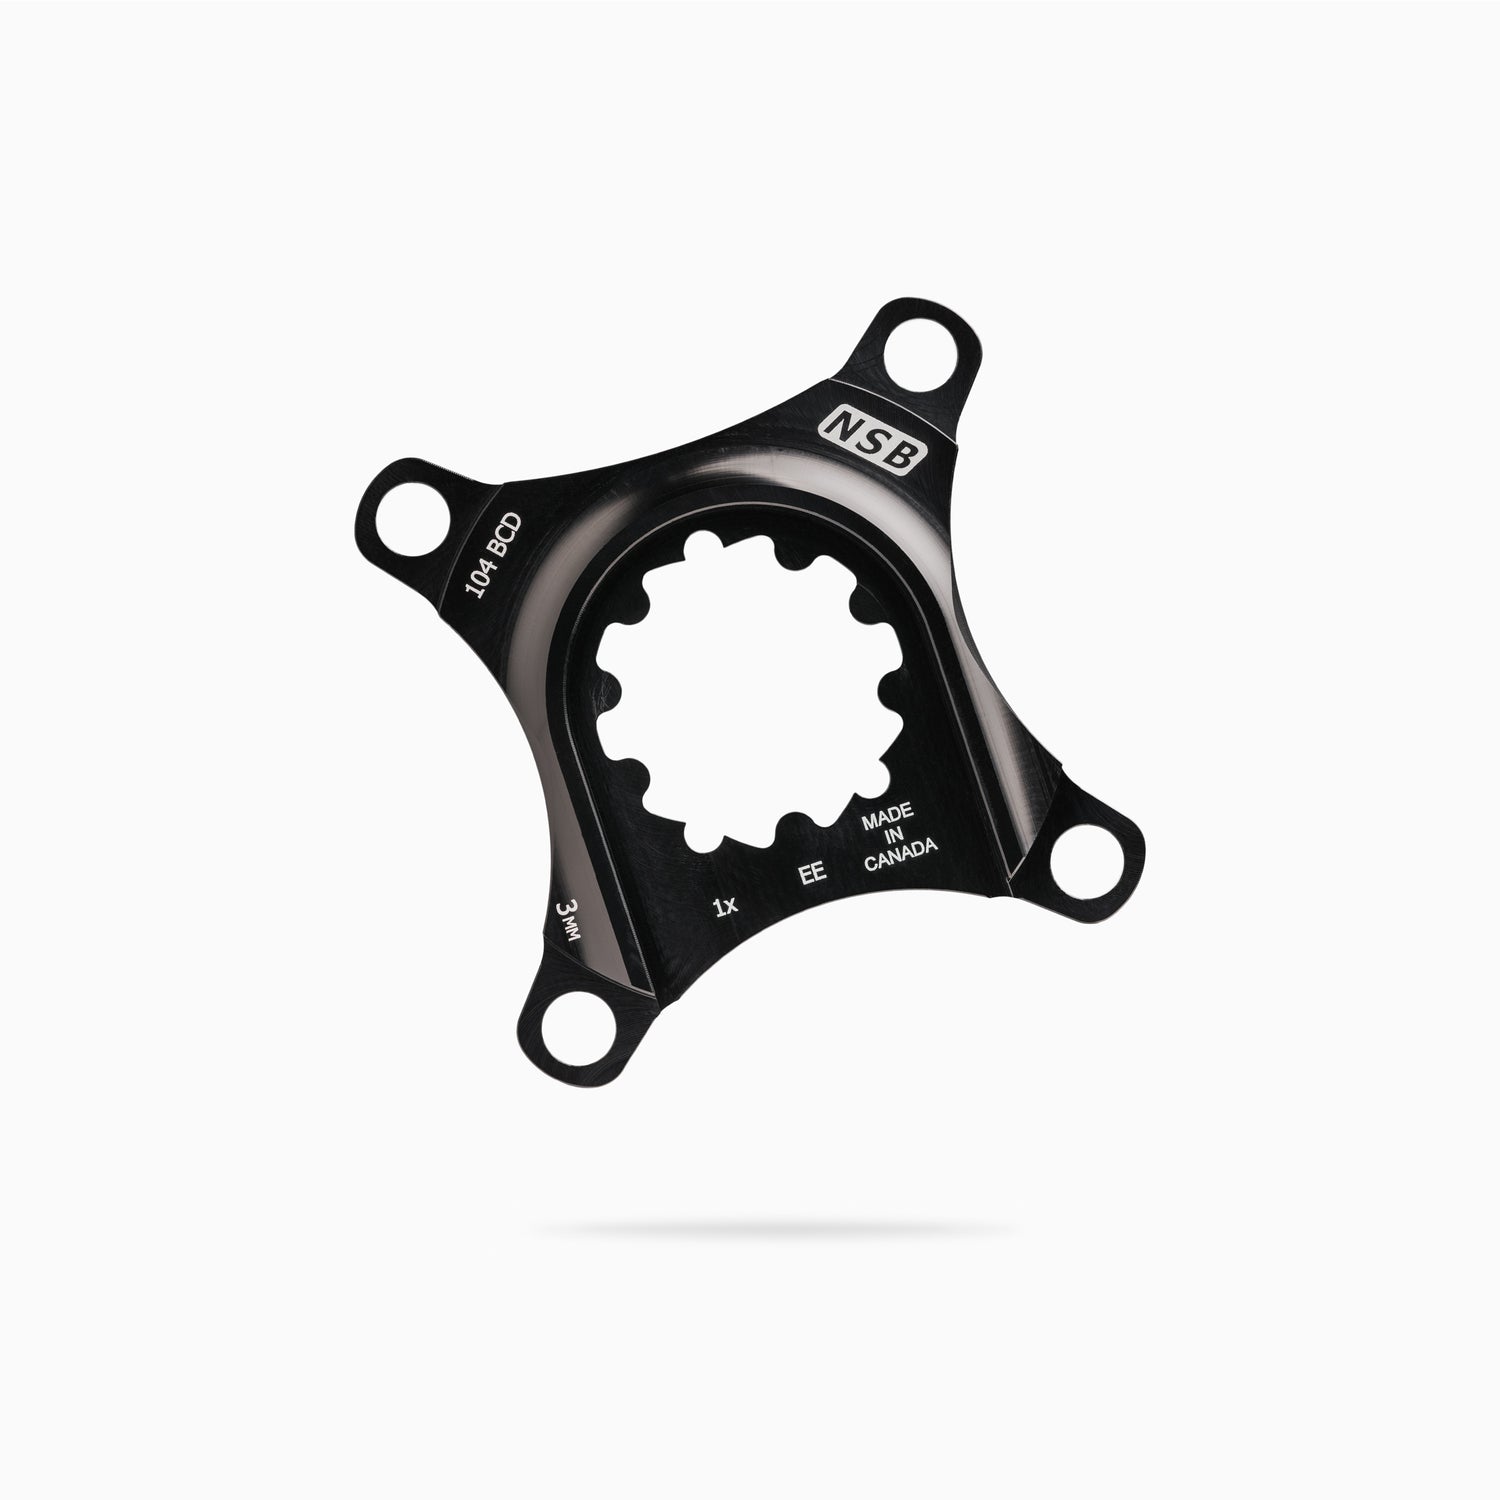 North Shore Billet Talon crankset in anodized pewter with NSB chainring